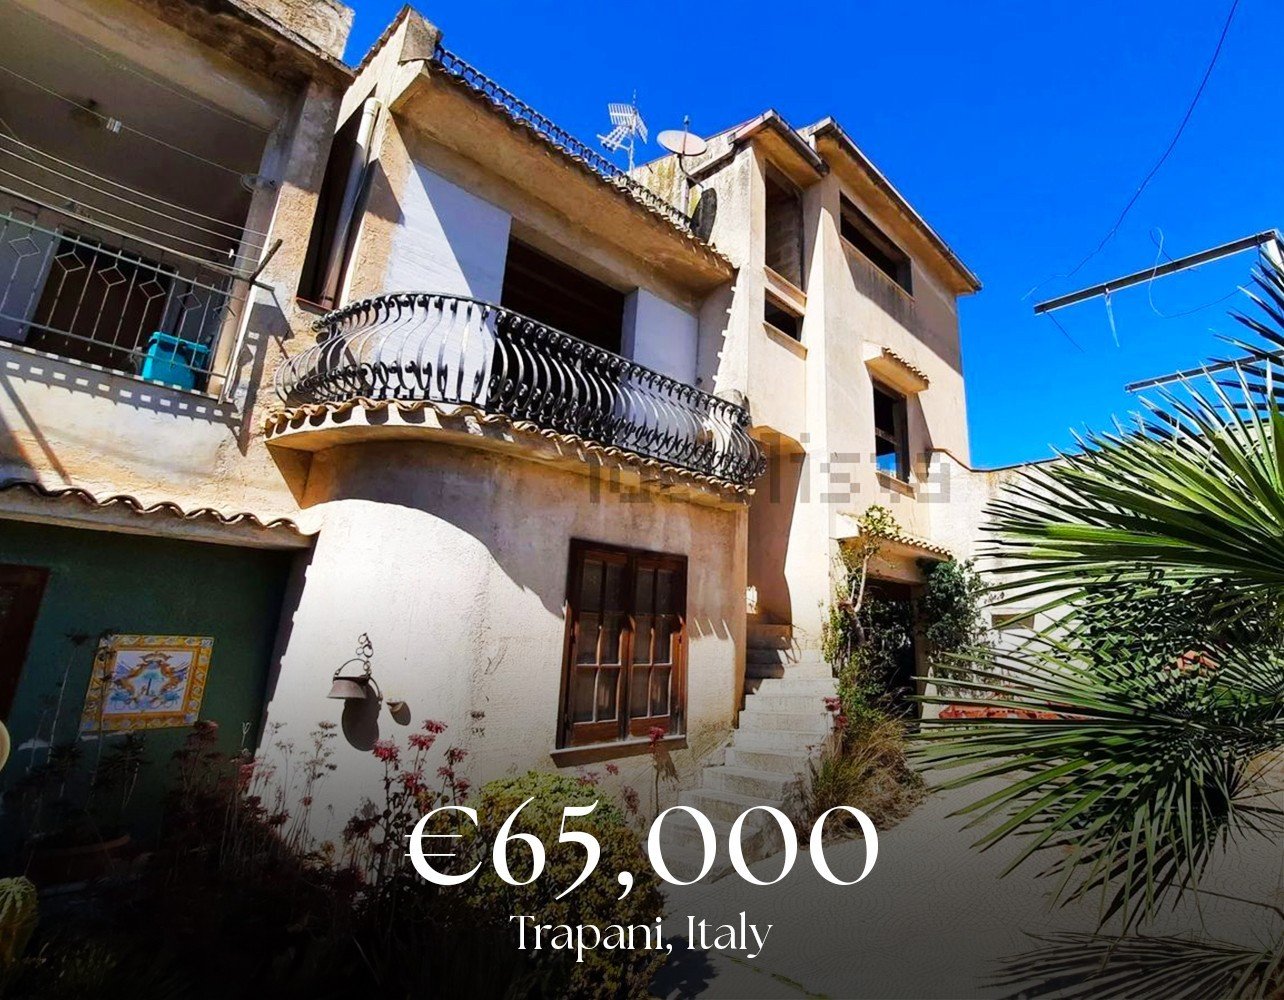 3 bedrooms, 3 bathrooms, 3 storeys, 3 balconies and 3 minutes from the city centre. This 114sqm village house may have three of many things but its a ten in our books! The perfect renovation project in Italy has arrived. If you're looking to add your